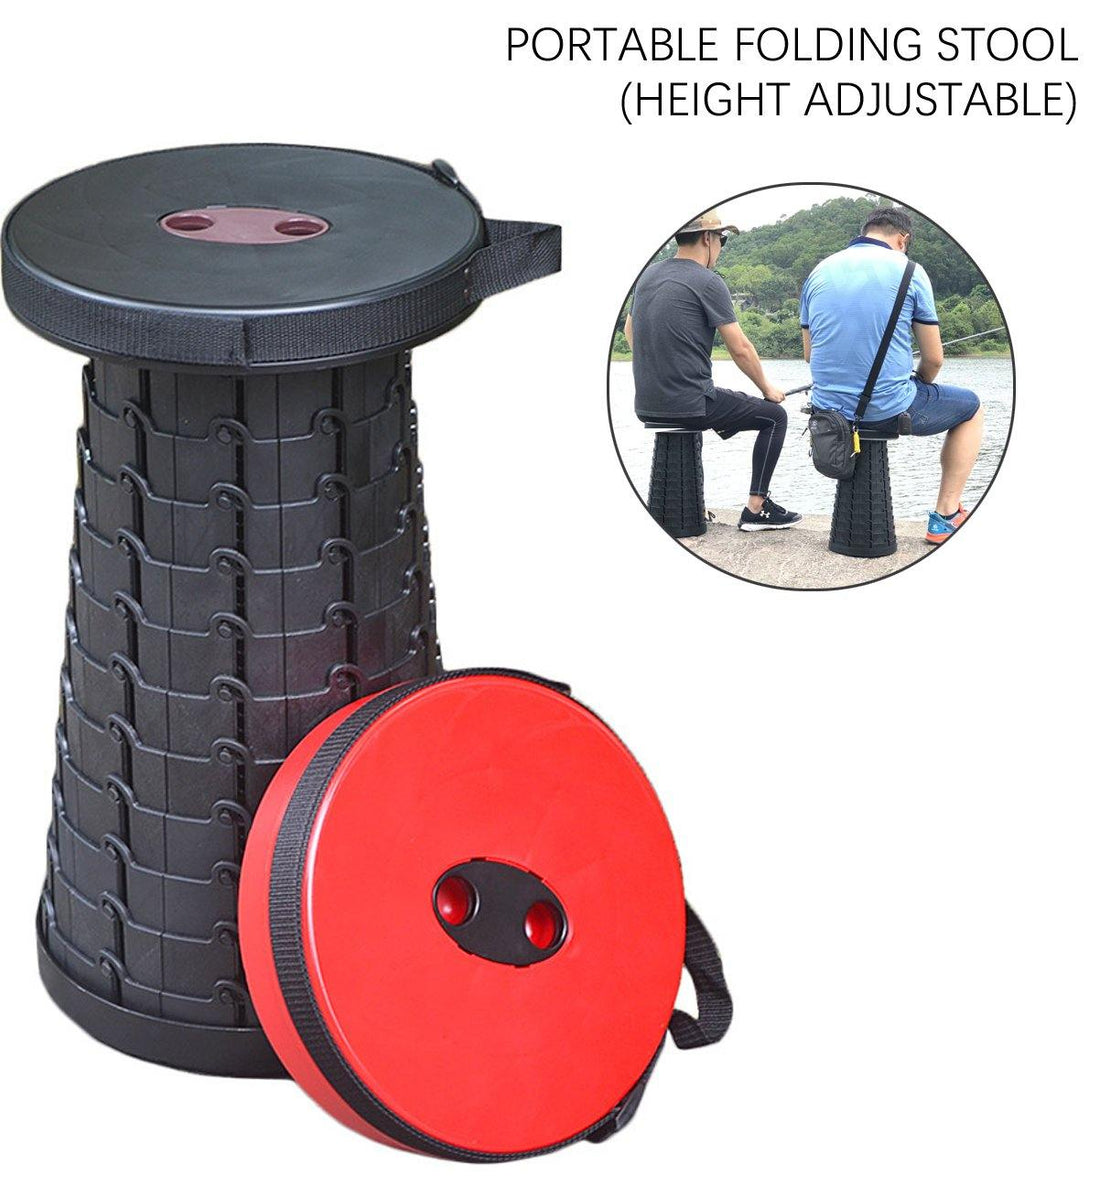 CUUWE Portable Telescoping Stool Retractable Stool Seat Folding Camping Stool Seat for Fishing Hiking Traveling Outdoor Activities Red O 